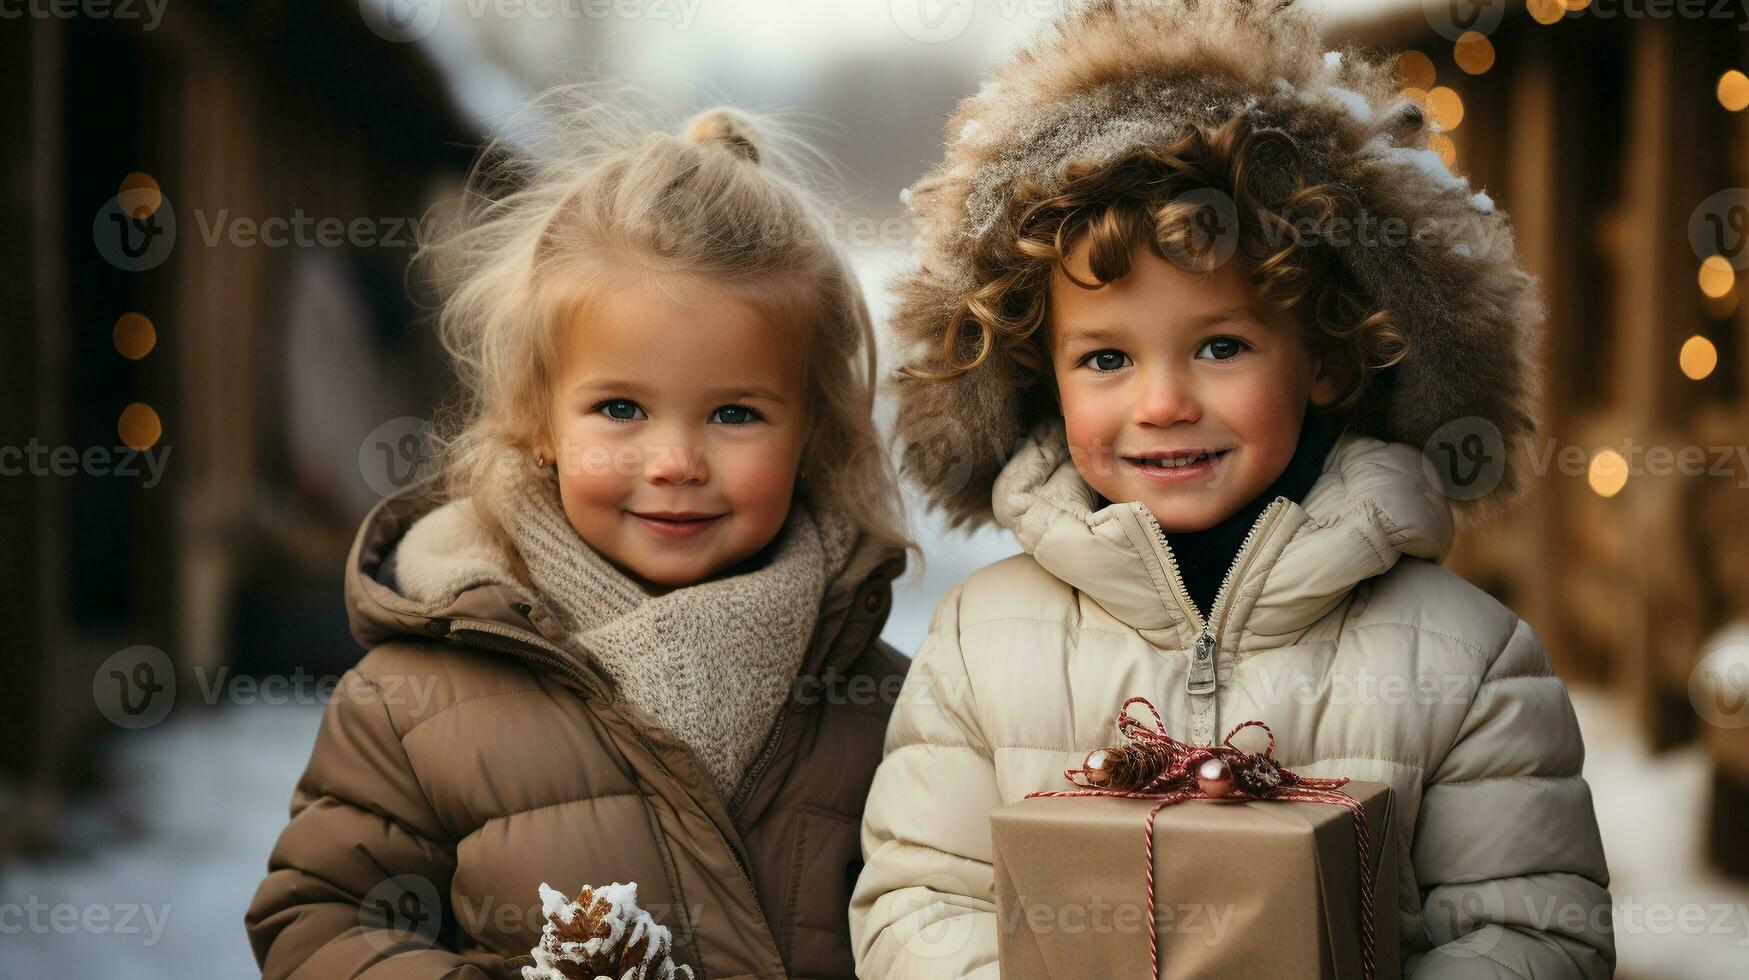 Cute Couple of Children Dressed Warmly Holding a Wrapped Christmas Gift Outdoors. photo